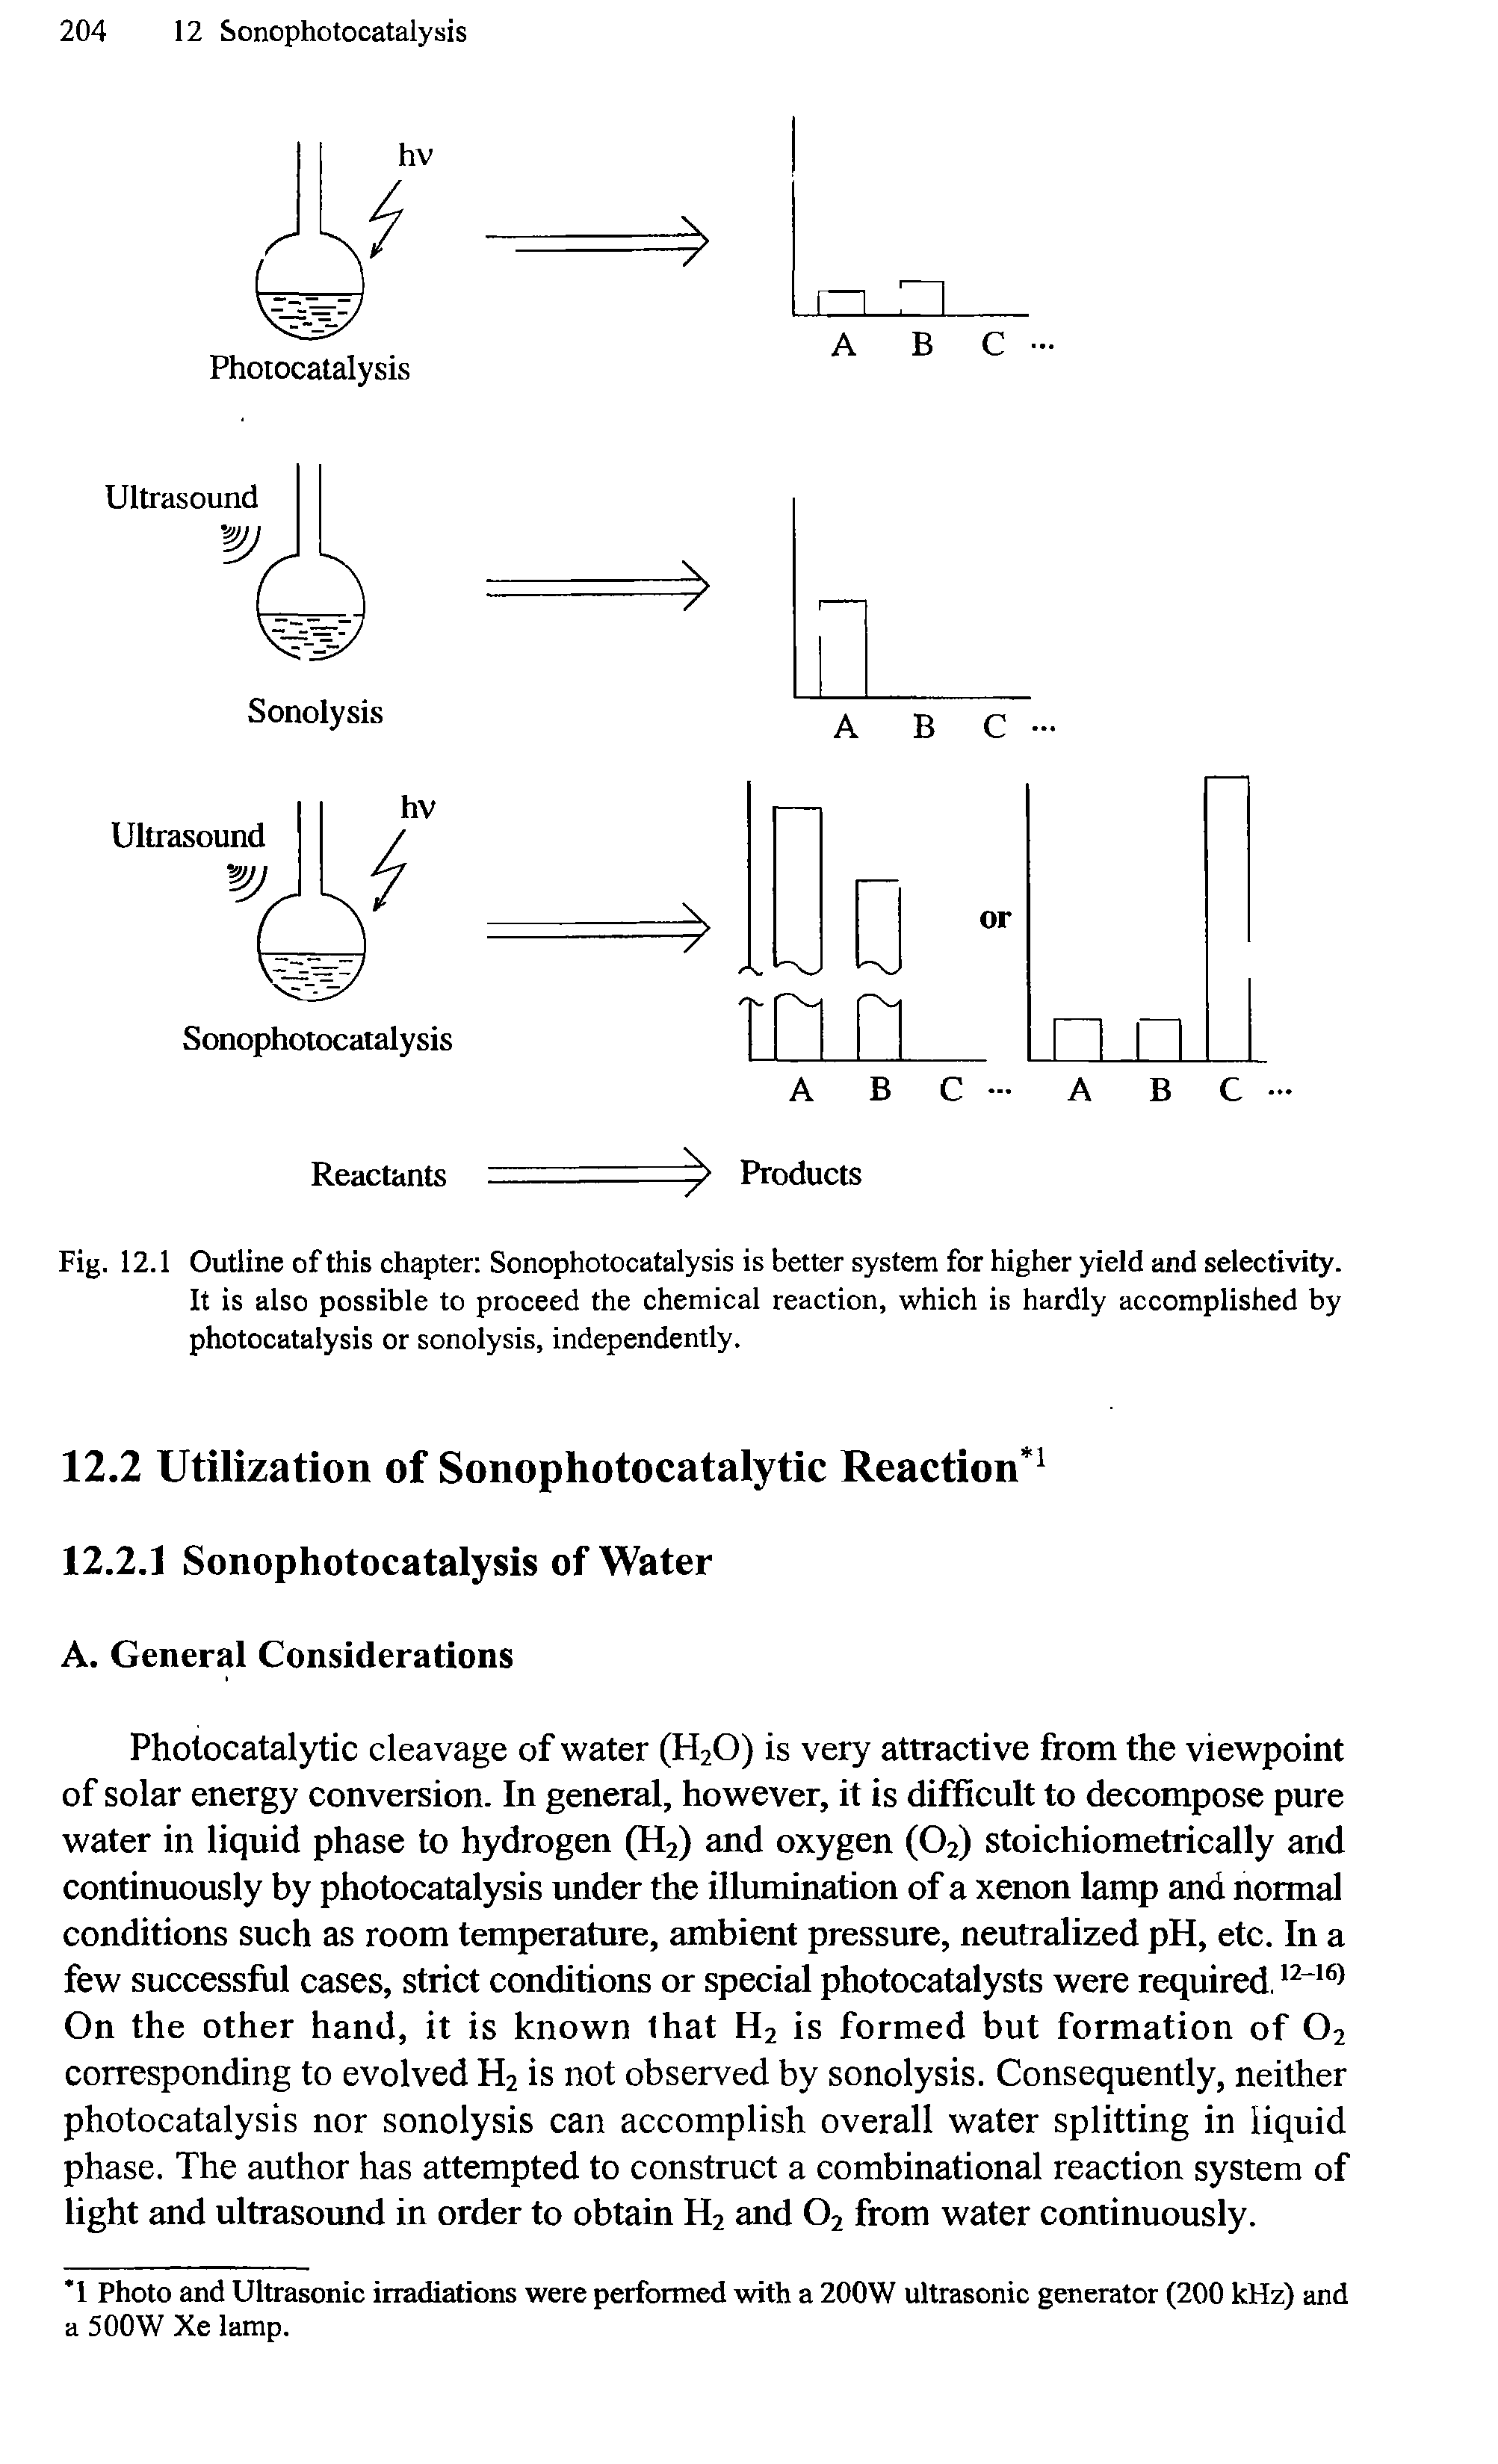 Fig. 12.1 Outline of this chapter Sonophotocatalysis is better system for higher yield and selectivity.